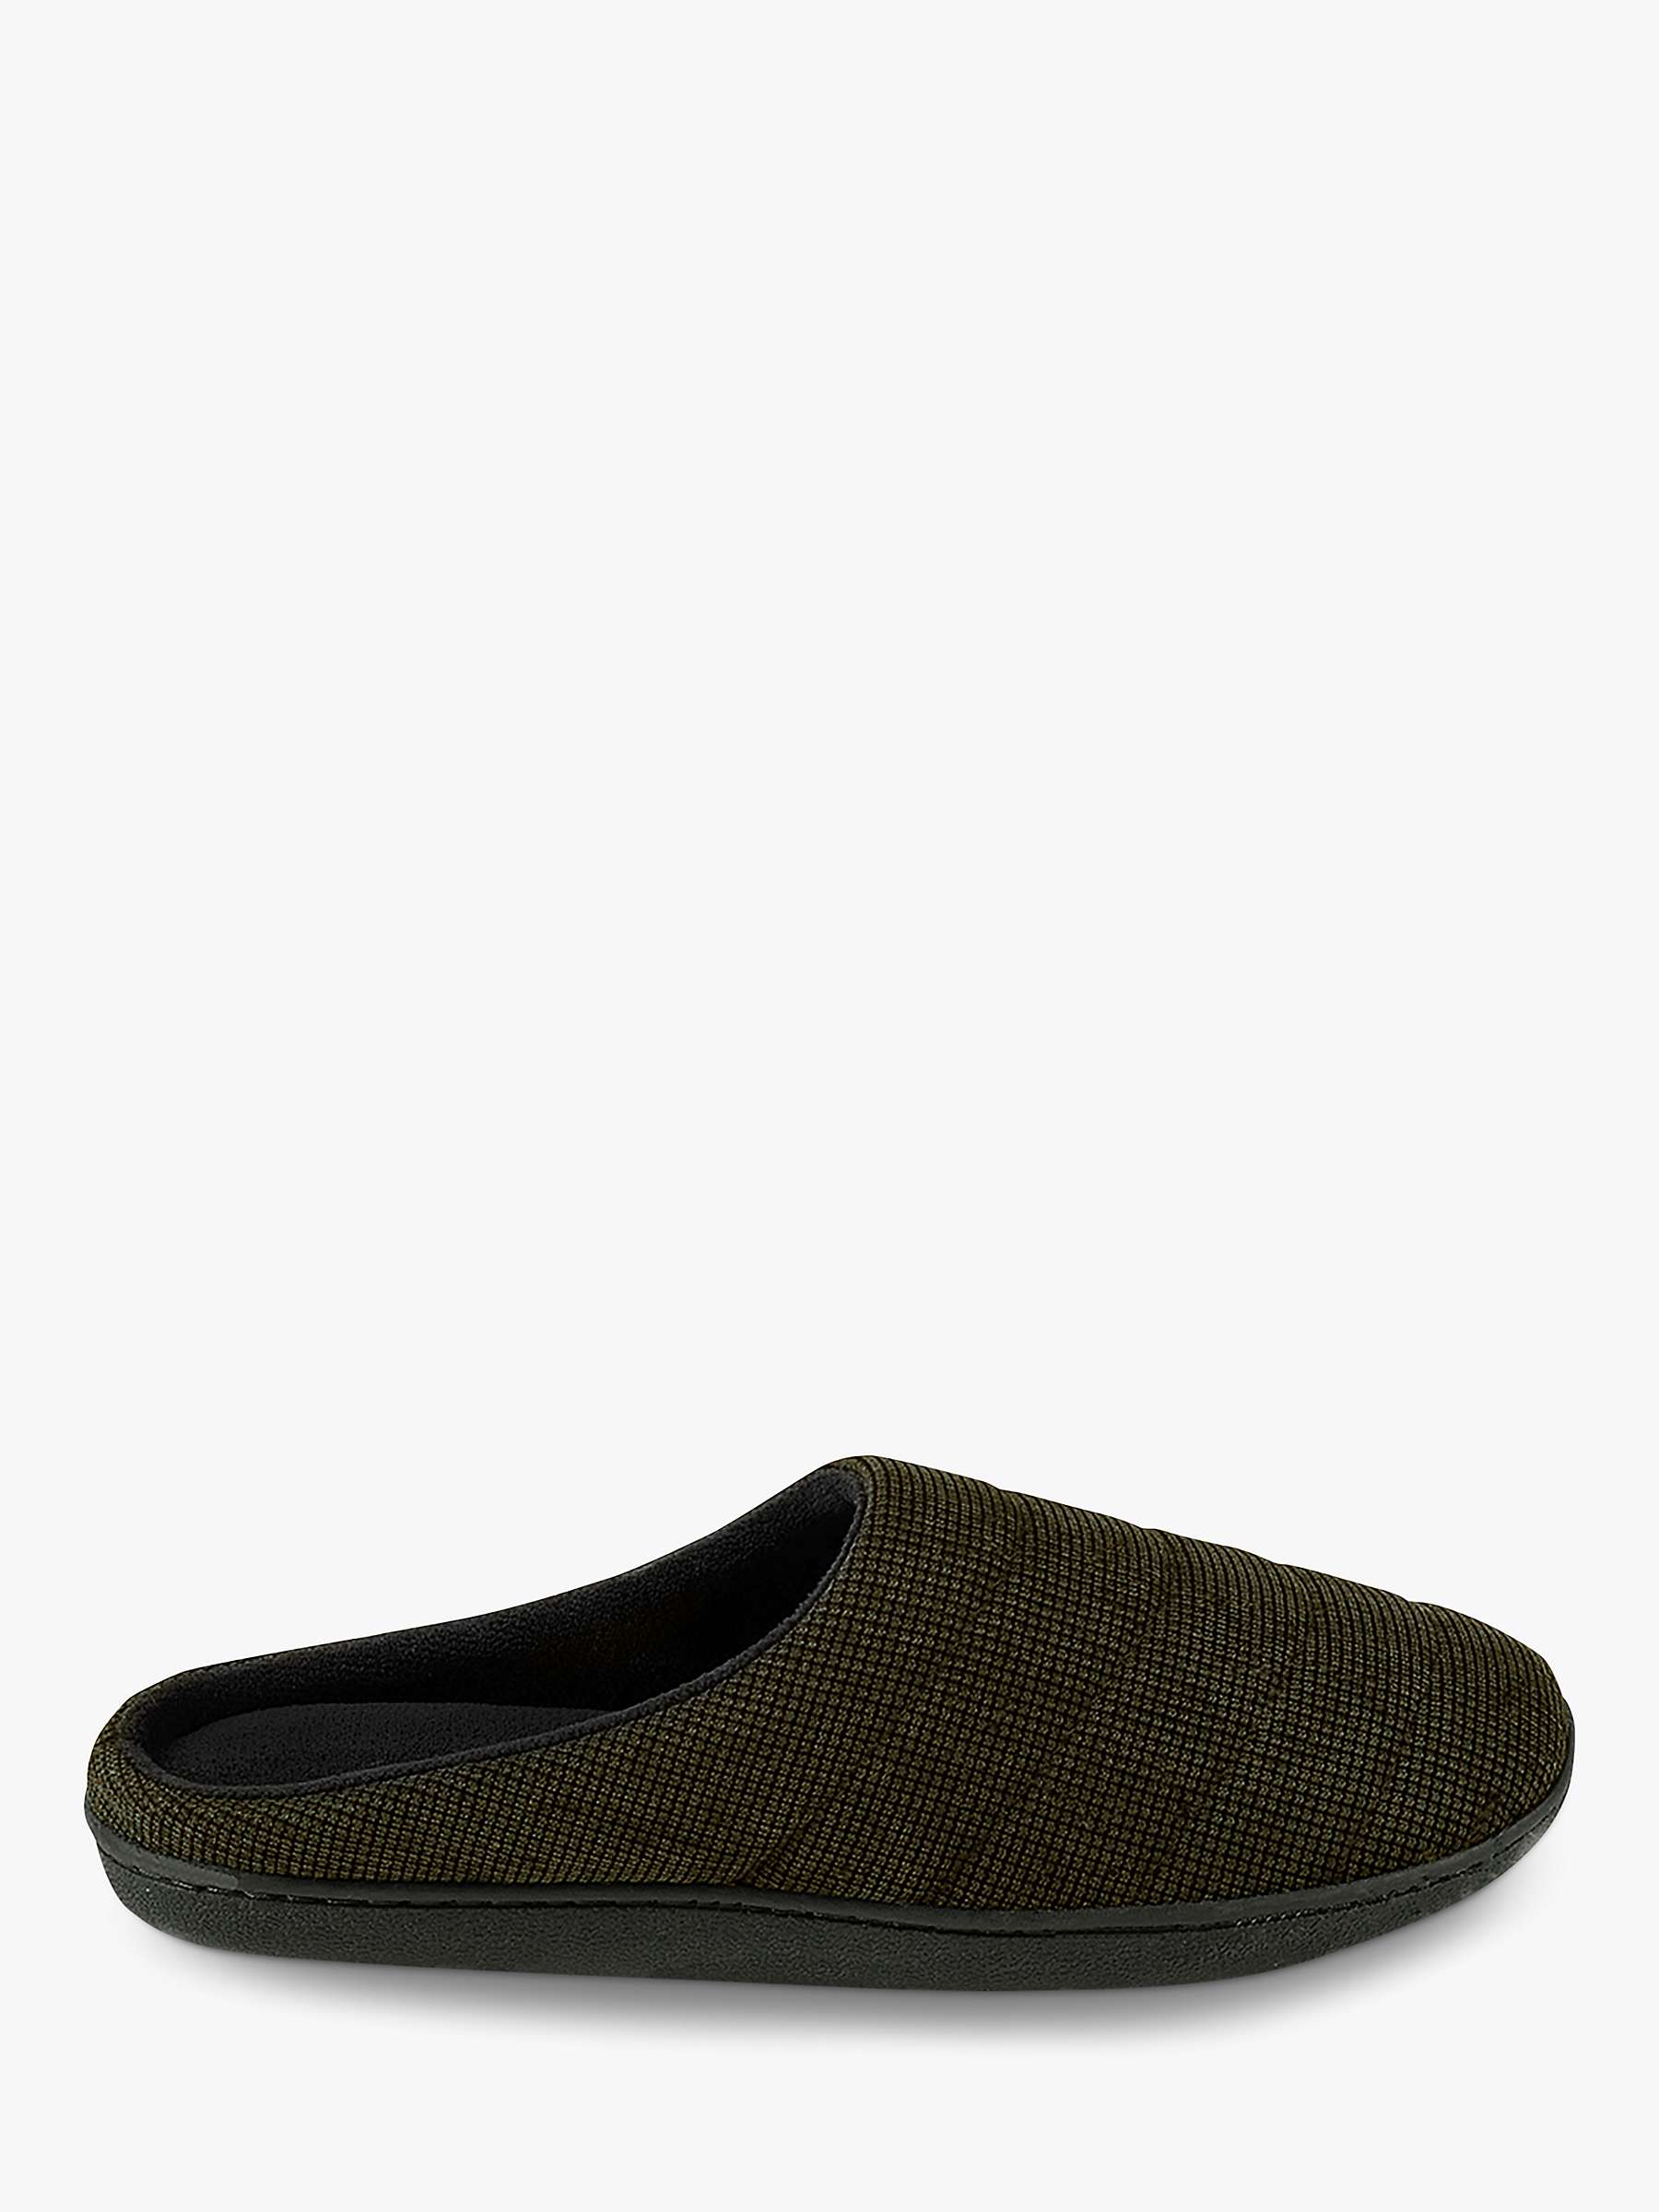 Buy totes Isotoner Textured Cord Stitched Mule Slippers Online at johnlewis.com